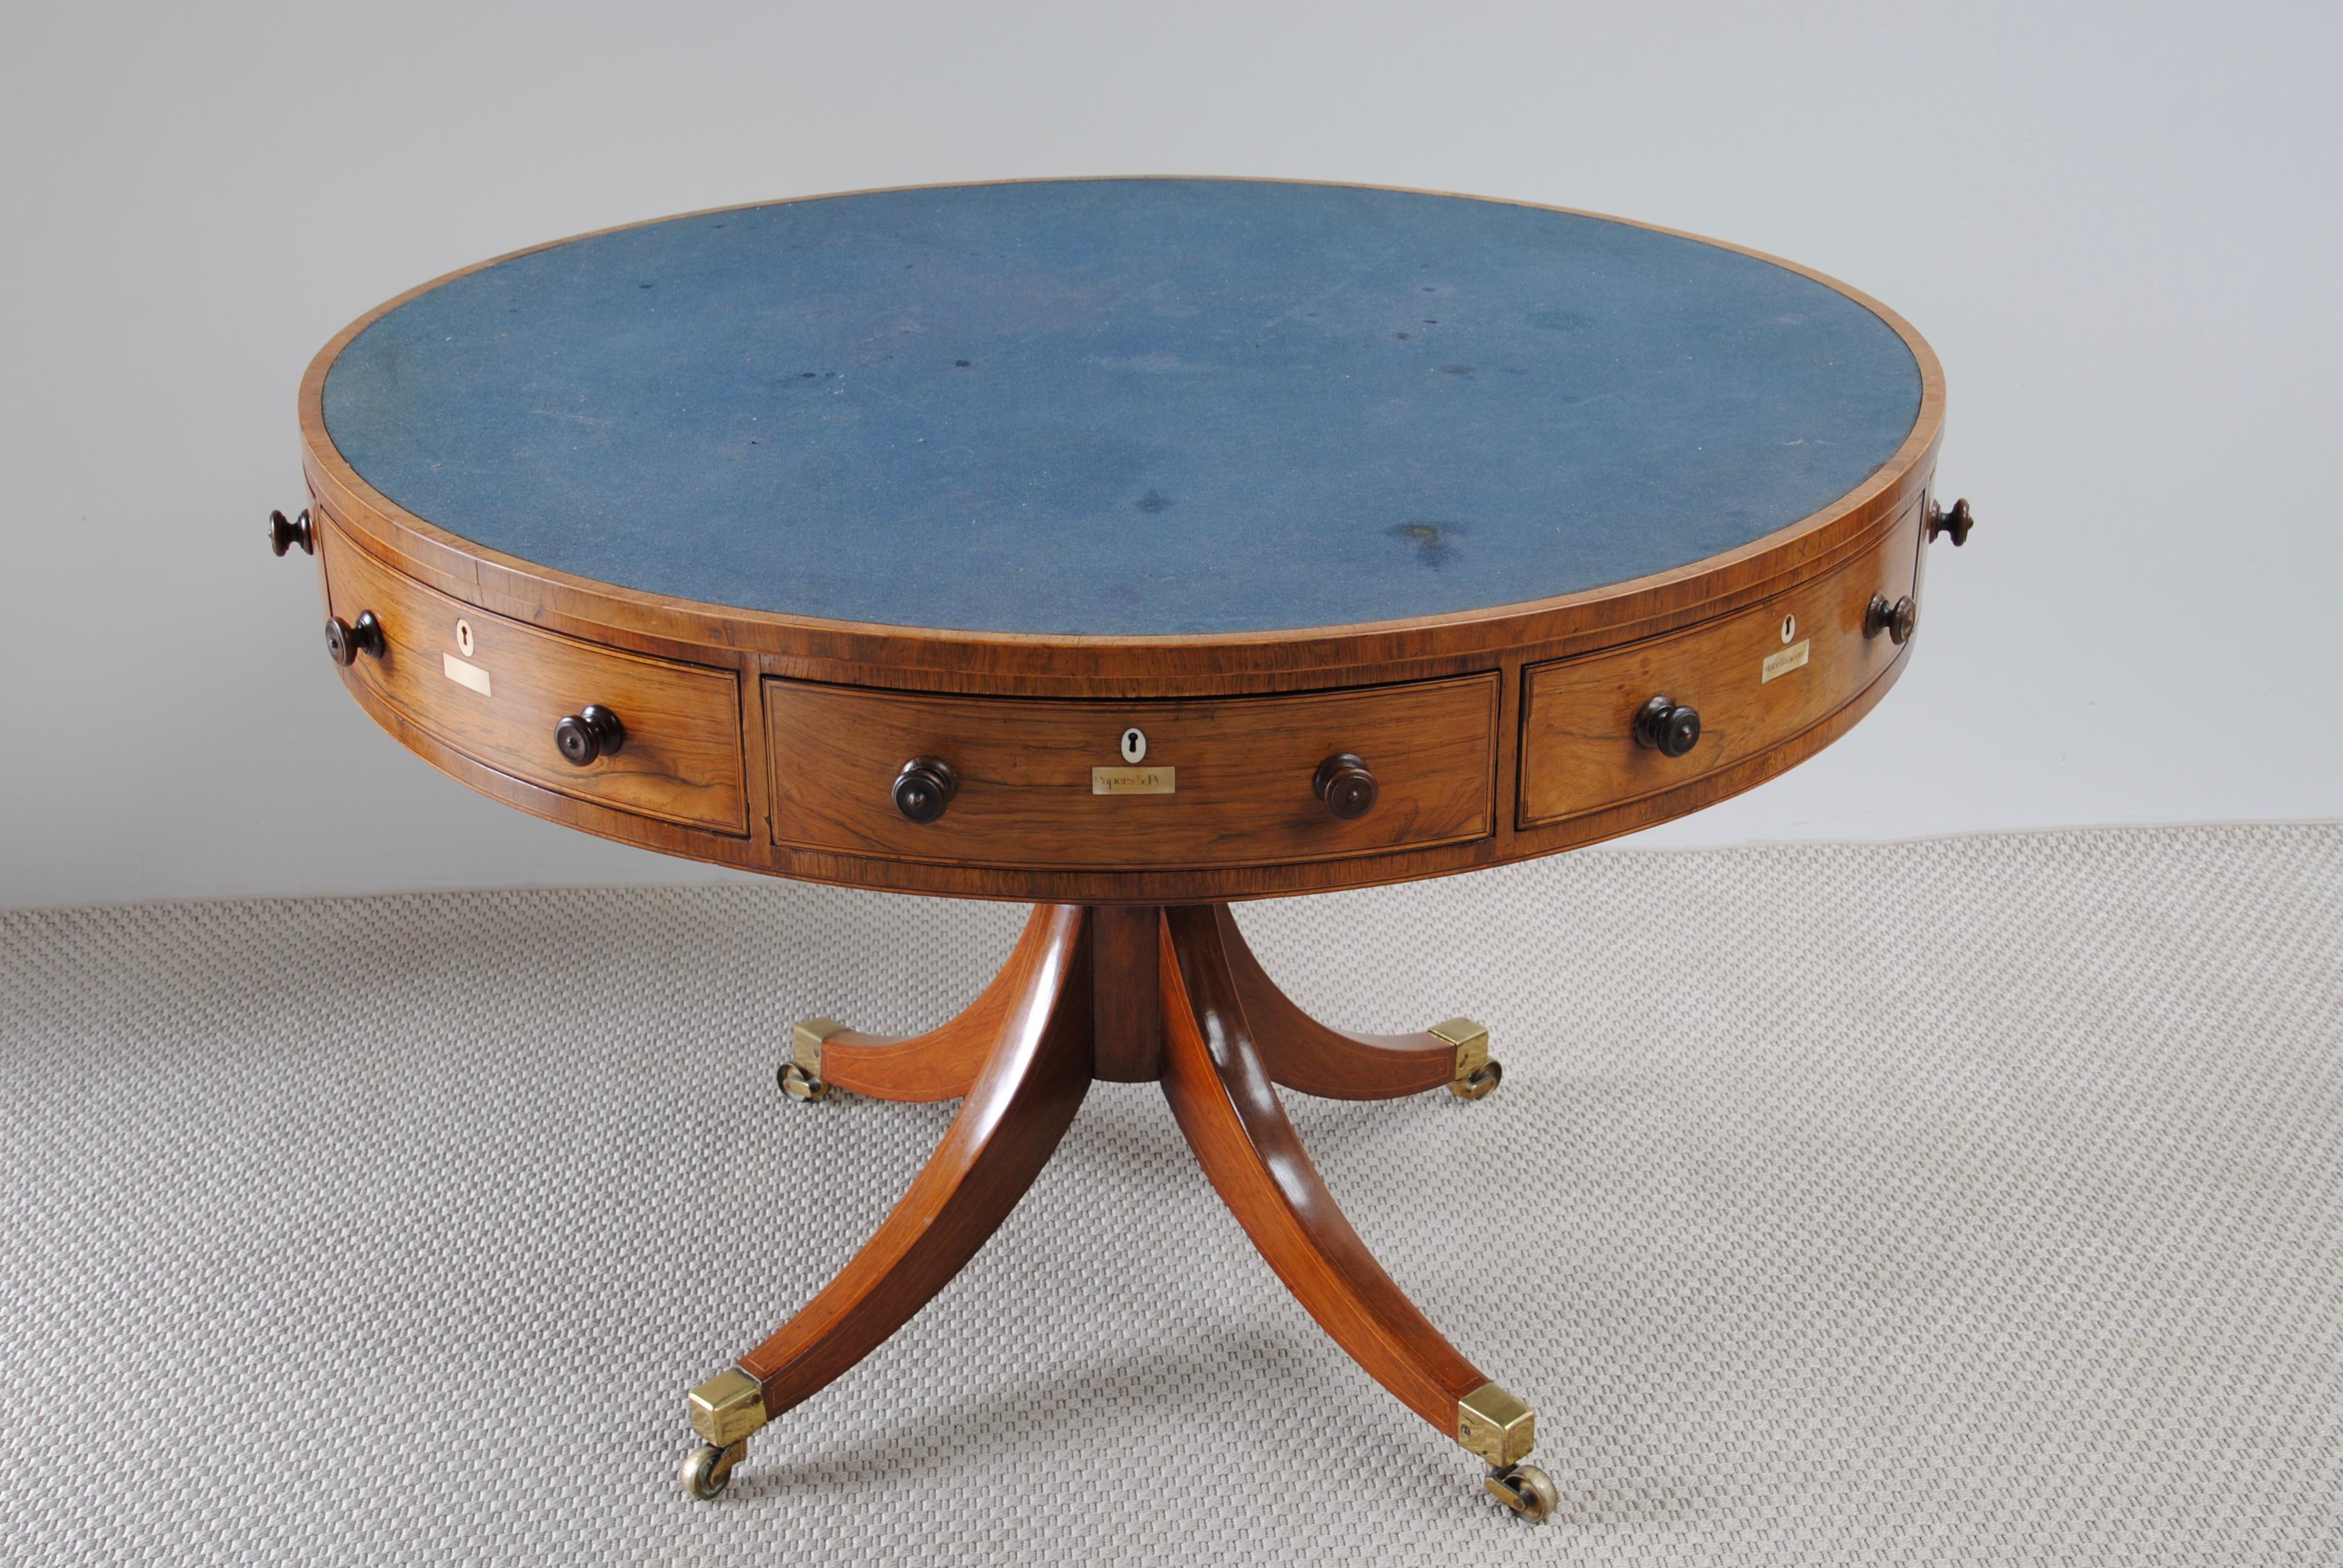 A Regency rosewood drum table with cross bandings and boxwood lines. The two larger drawers fitted with the Gillow design alphabet as found on the architects table. The top with blue baize.
      